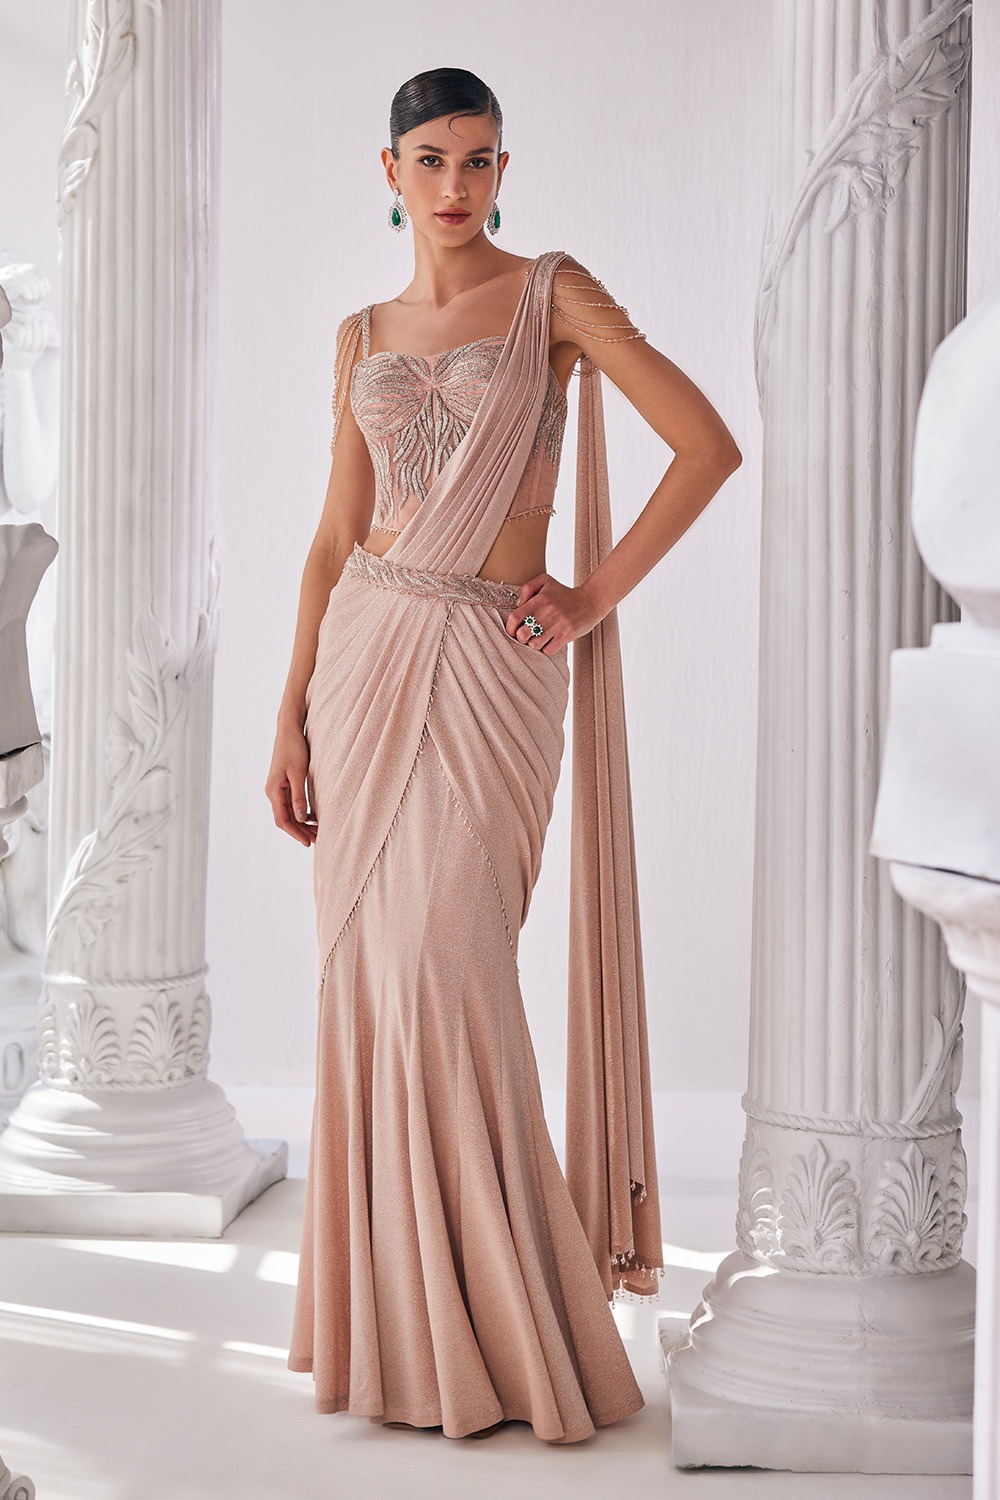 Peach Draped Saree With Corset Blouse And Statement Belt